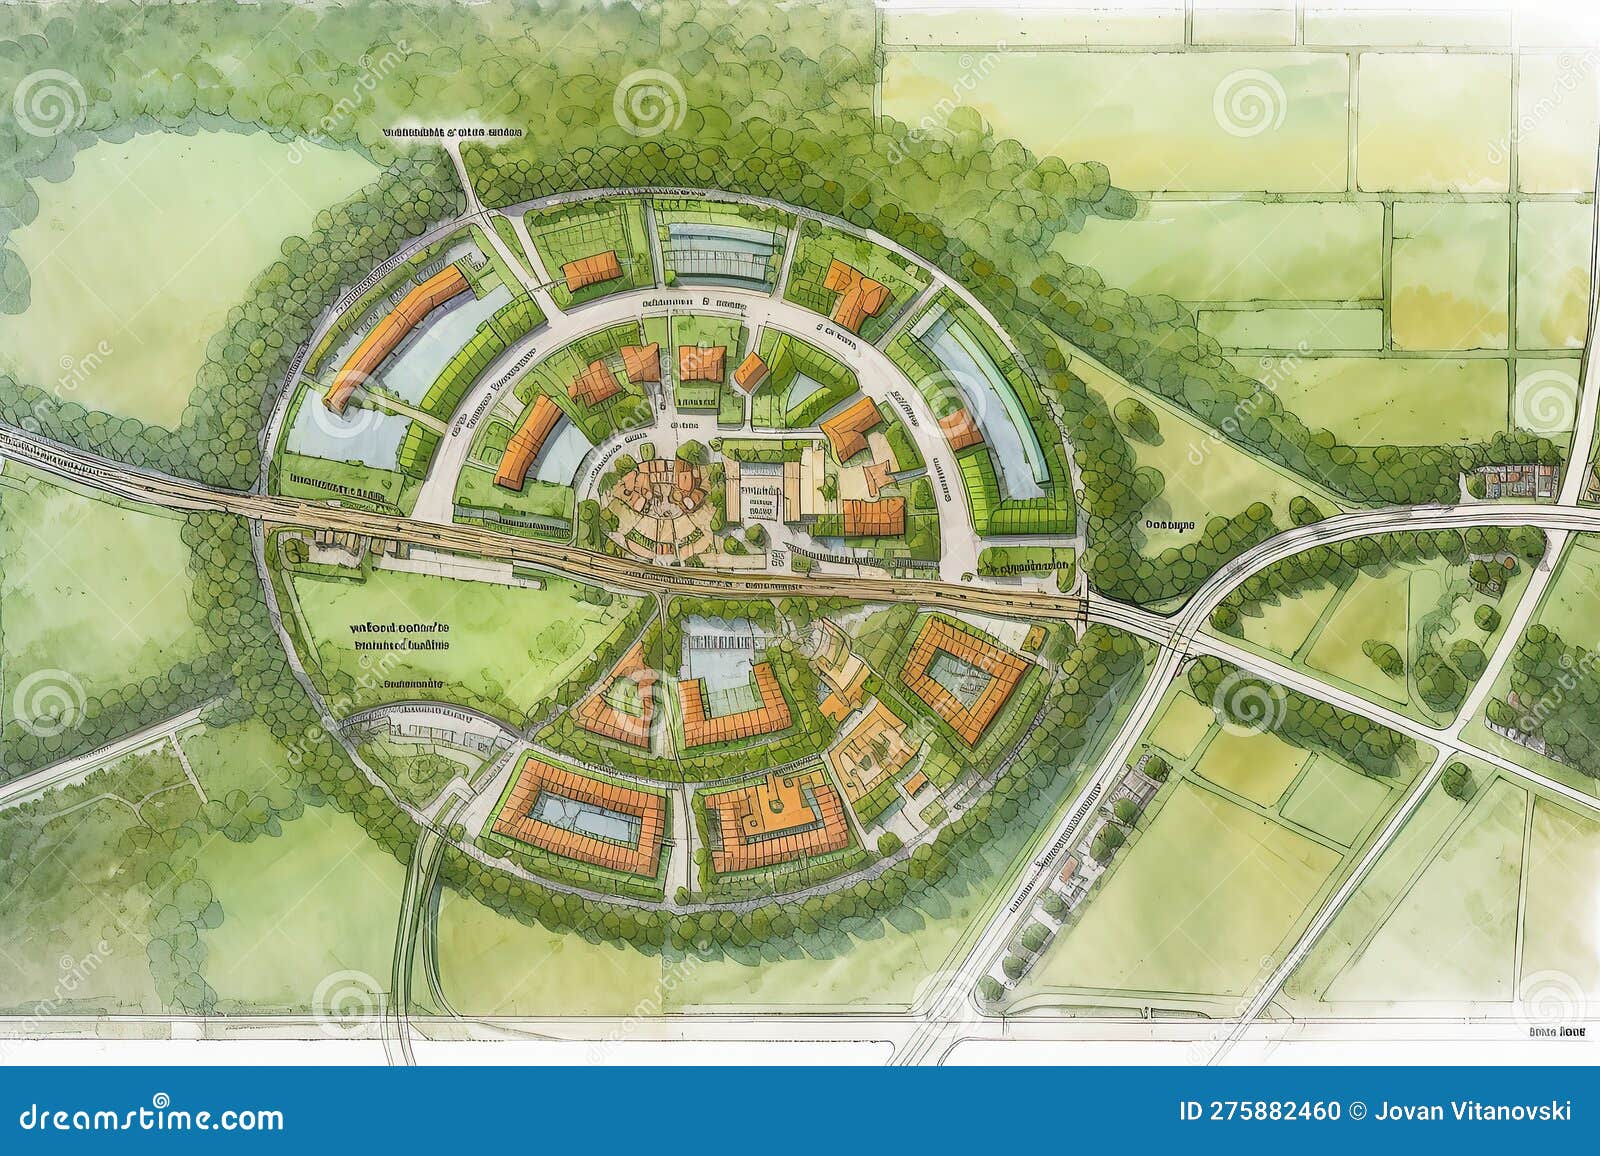 Outline drawing to the detailed master plan for the Rycerska housing   Download Scientific Diagram